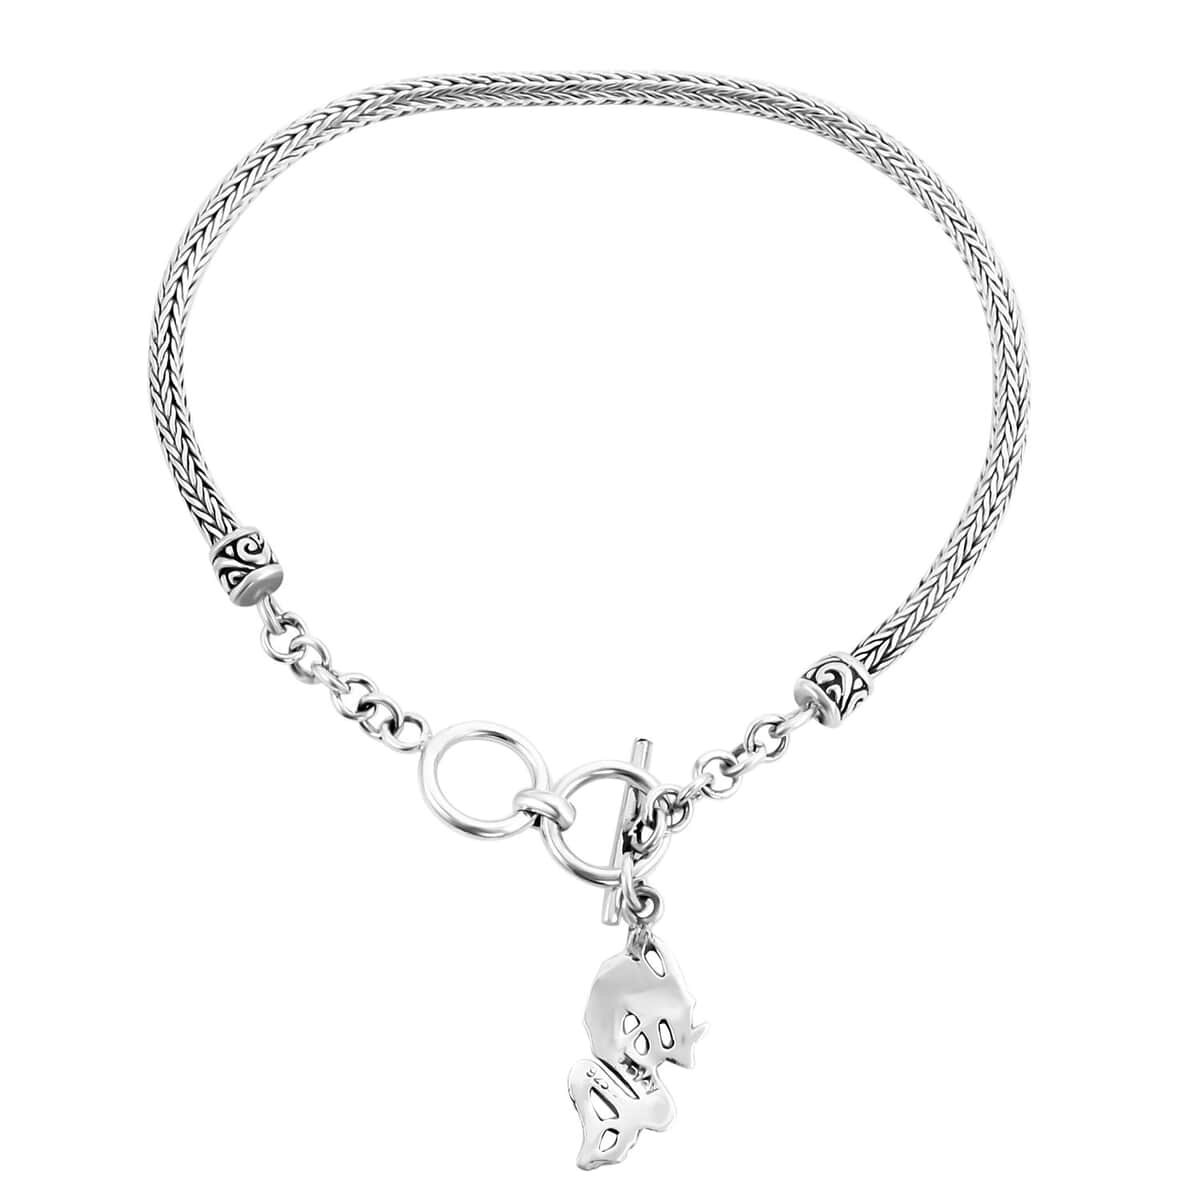 Mother’s Day Gift Bali Legacy Sterling Silver Tulang Naga Dragon Bracelet with Dragon Charm (6.50-8.0In) 8.20 Grams image number 2